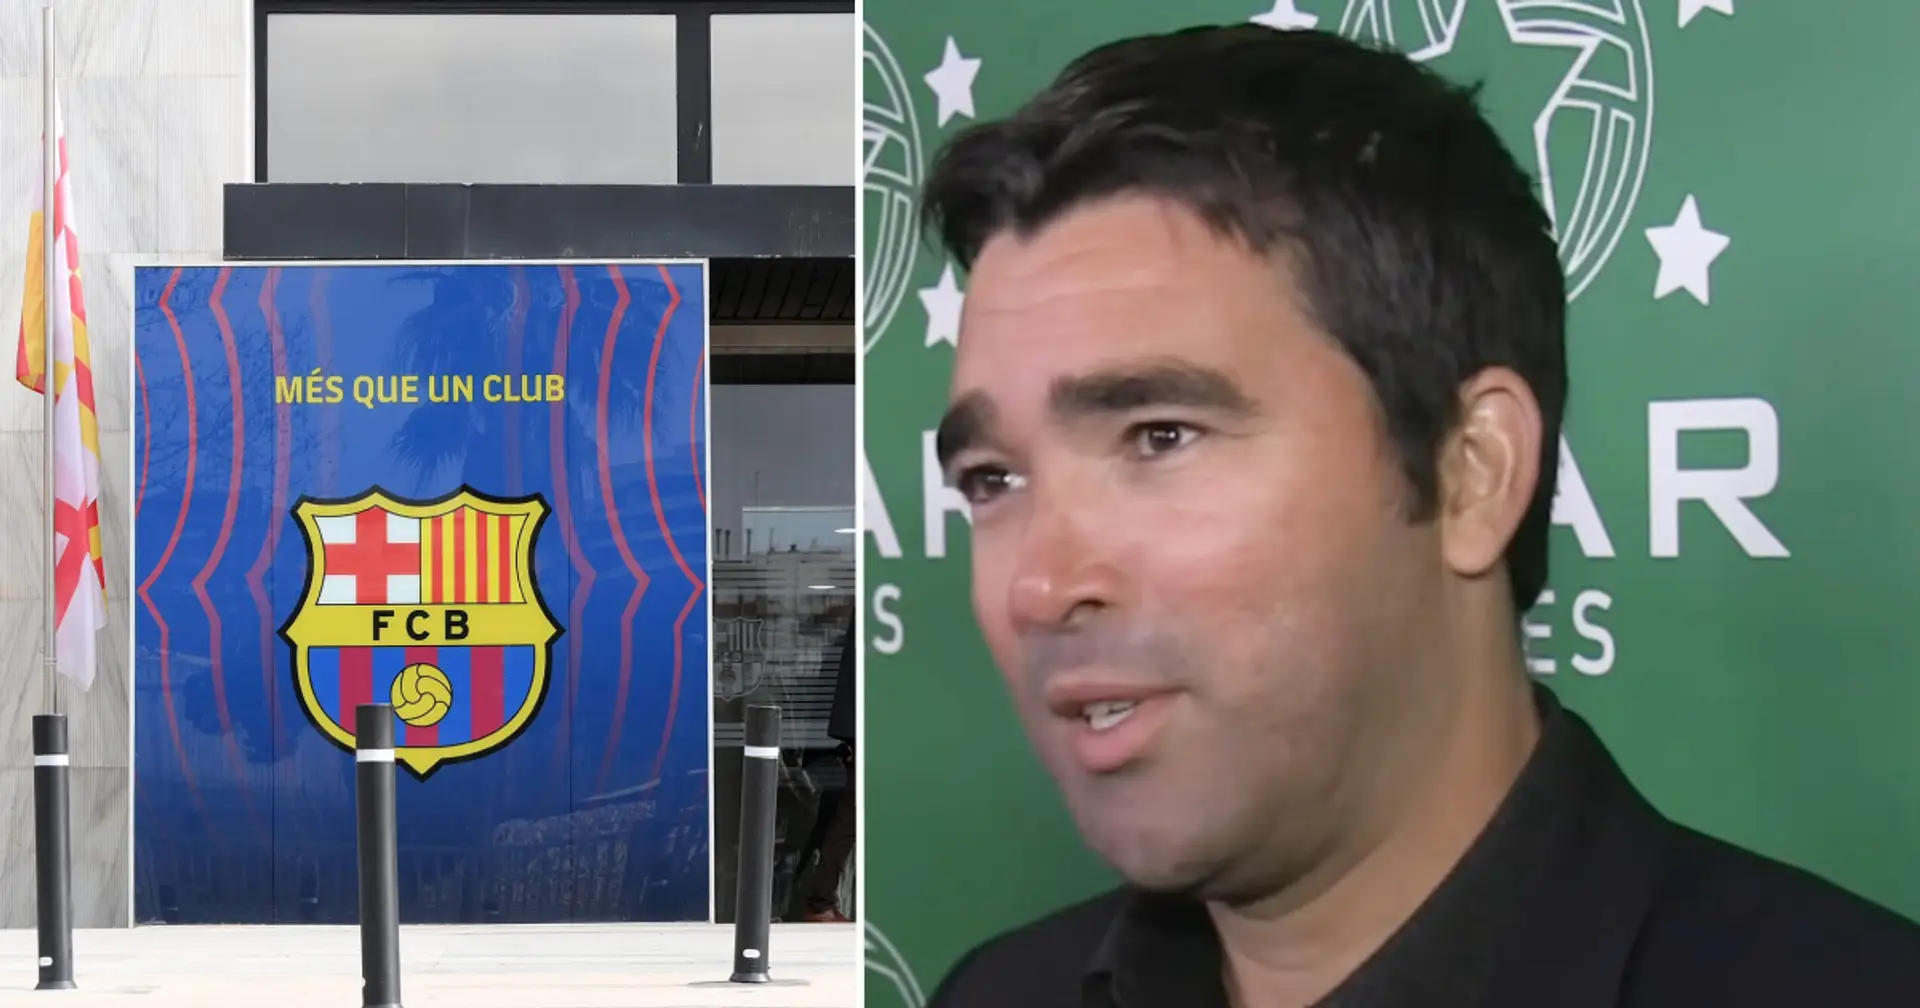 Deco shuts down his sports agency — it has to do with Barca